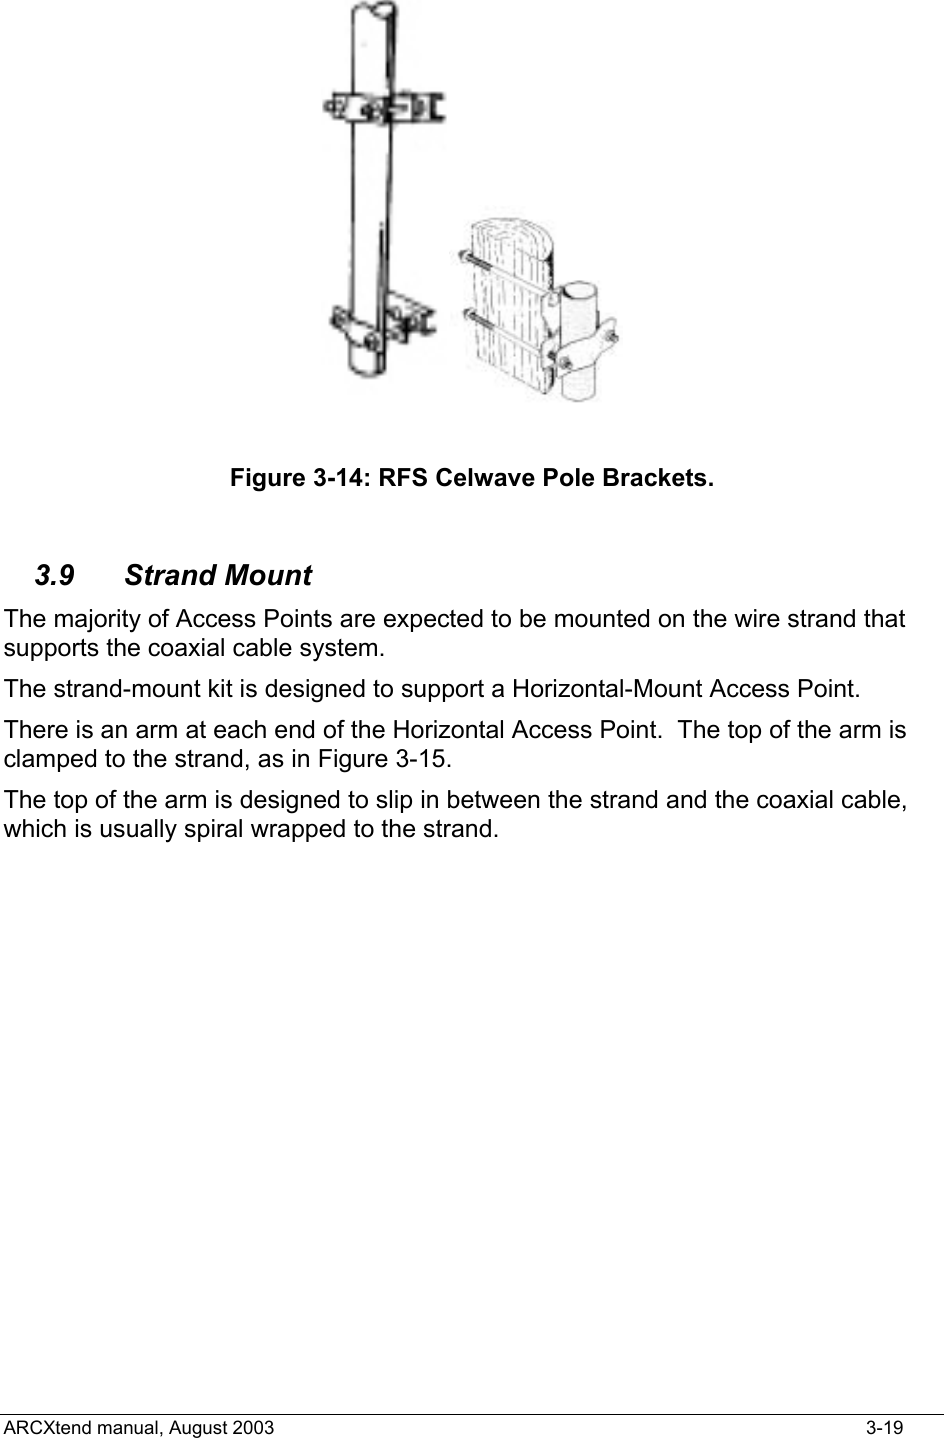    Figure 3-14: RFS Celwave Pole Brackets.  3.9 Strand Mount The majority of Access Points are expected to be mounted on the wire strand that supports the coaxial cable system. The strand-mount kit is designed to support a Horizontal-Mount Access Point. There is an arm at each end of the Horizontal Access Point.  The top of the arm is clamped to the strand, as in Figure 3-15. The top of the arm is designed to slip in between the strand and the coaxial cable, which is usually spiral wrapped to the strand. ARCXtend manual, August 2003    3-19 